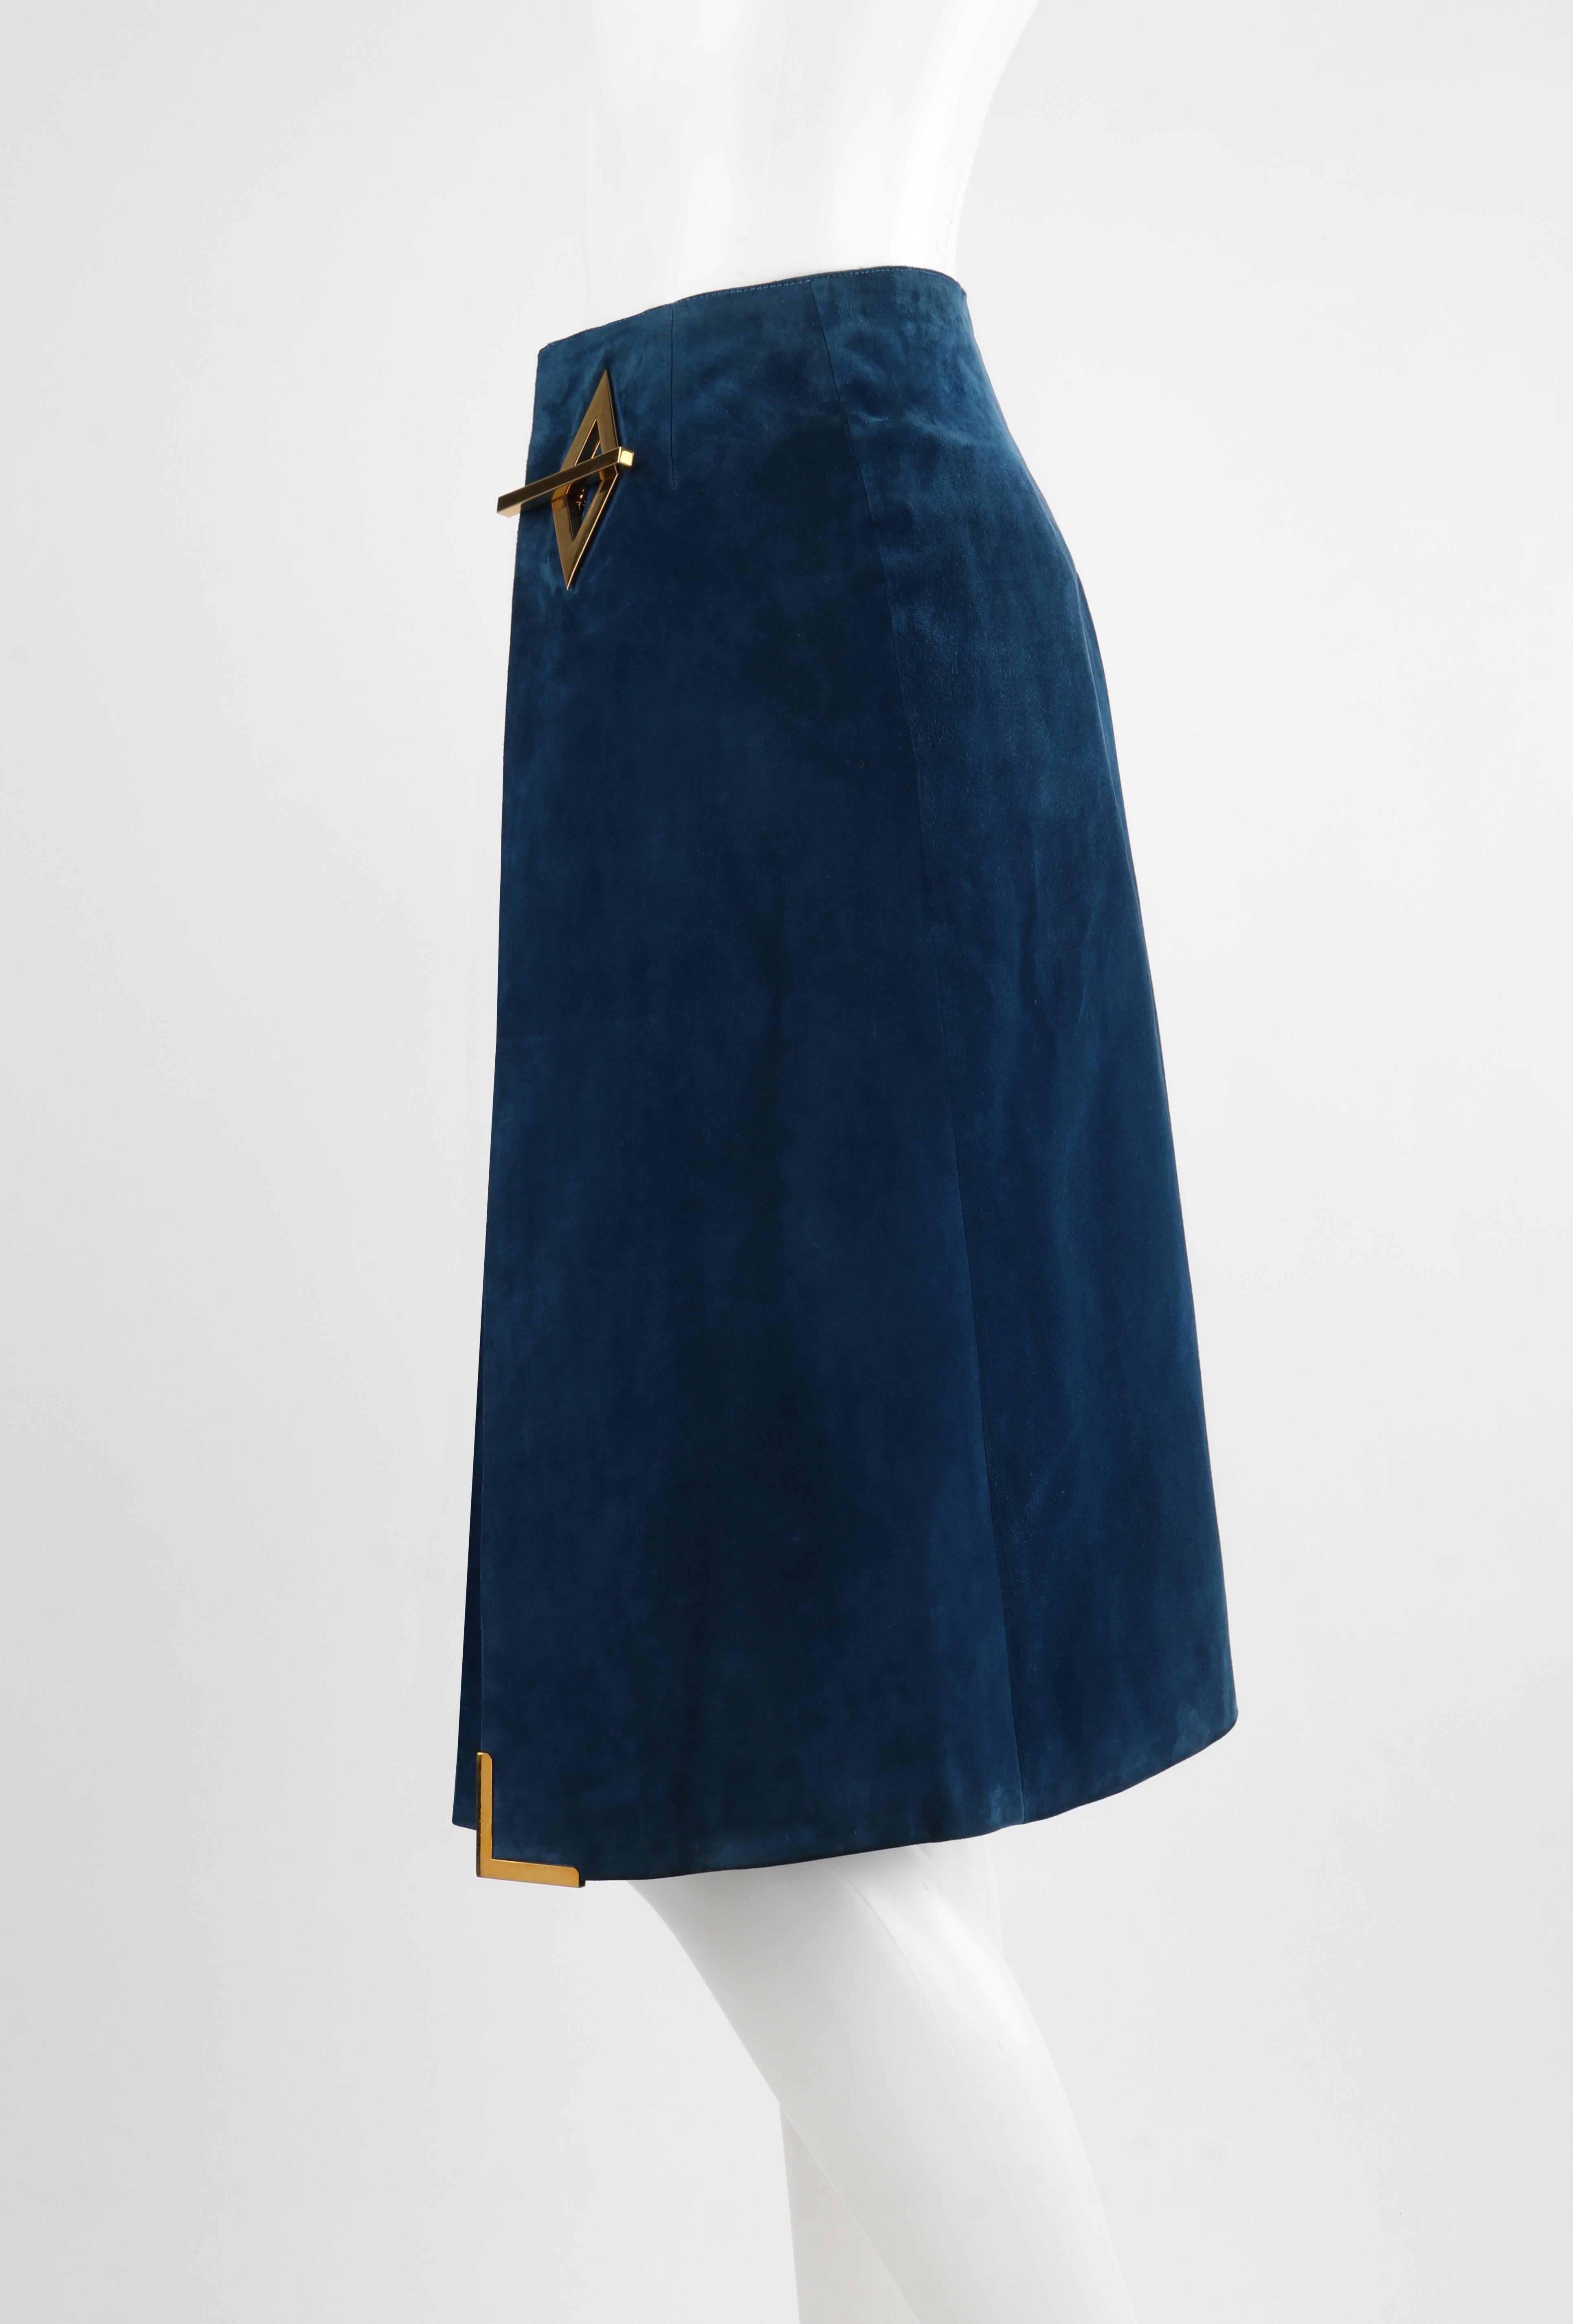 GUCCI c.1970's Dark Blue Suede Gold Chain Belt Pleated A-Line Knee Length Skirt For Sale 2